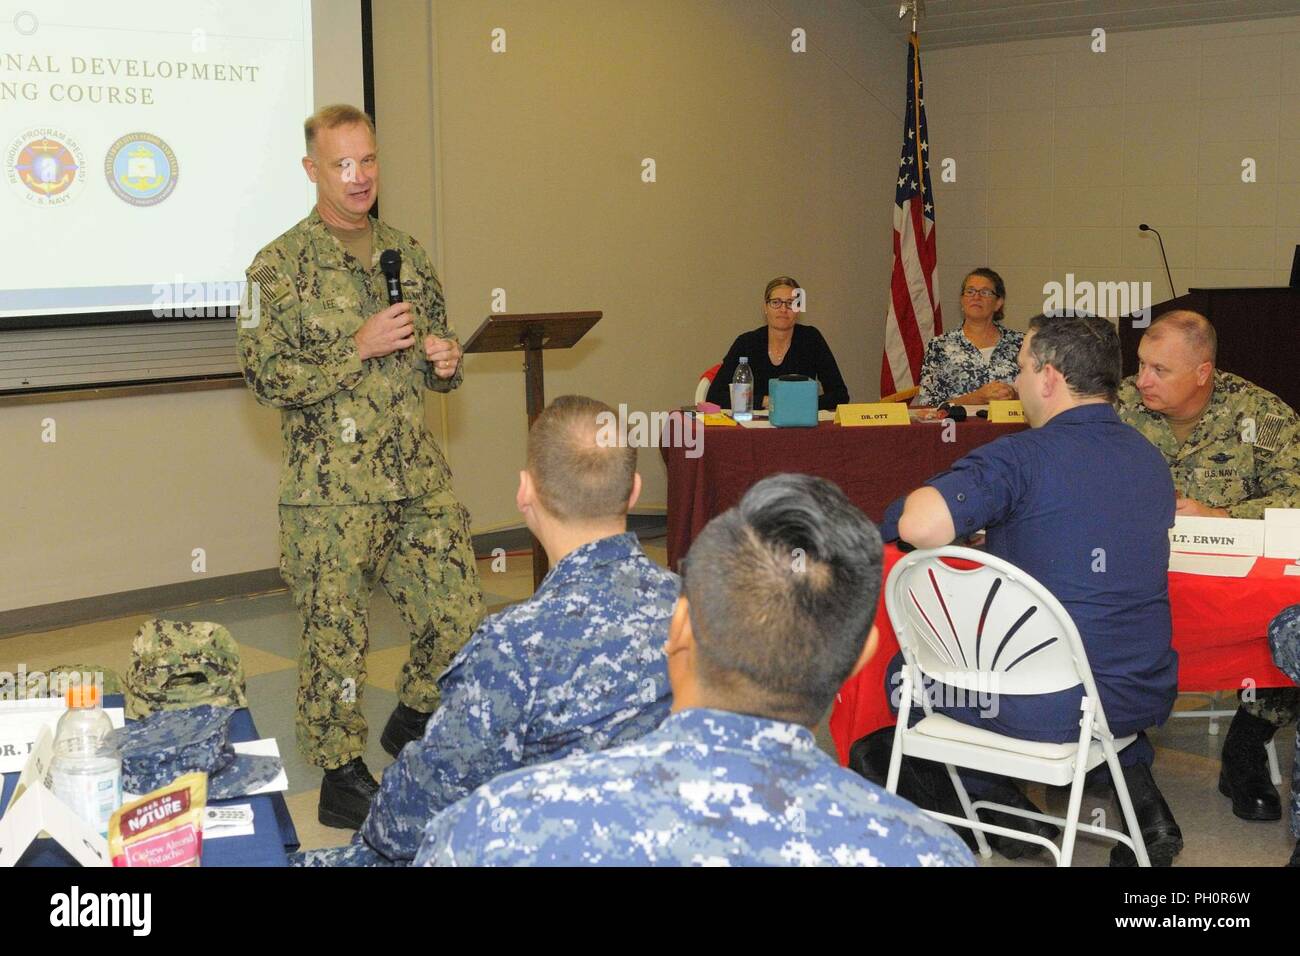 180619-N-GA223-1046  Rear Adm. Phillip “Endel” Lee, Jr., deputy chief of chaplains for reserve matters with the U.S. Navy Chief of Chaplains Office, addresses Navy and Marine Corps chaplains and religious program specialists attending a Professional Development Training Workshop hosted at the Seabee Memorial Chapel June 18-21, 2018, at Naval Construction Battalion Center (NCBC) Gulfport, Miss. This annual workshop addresses topics designed to help chaplains minister to and provide better care for the military population and their families. (U.S. Navy photo by Ryan Labadens/Released) Stock Photo